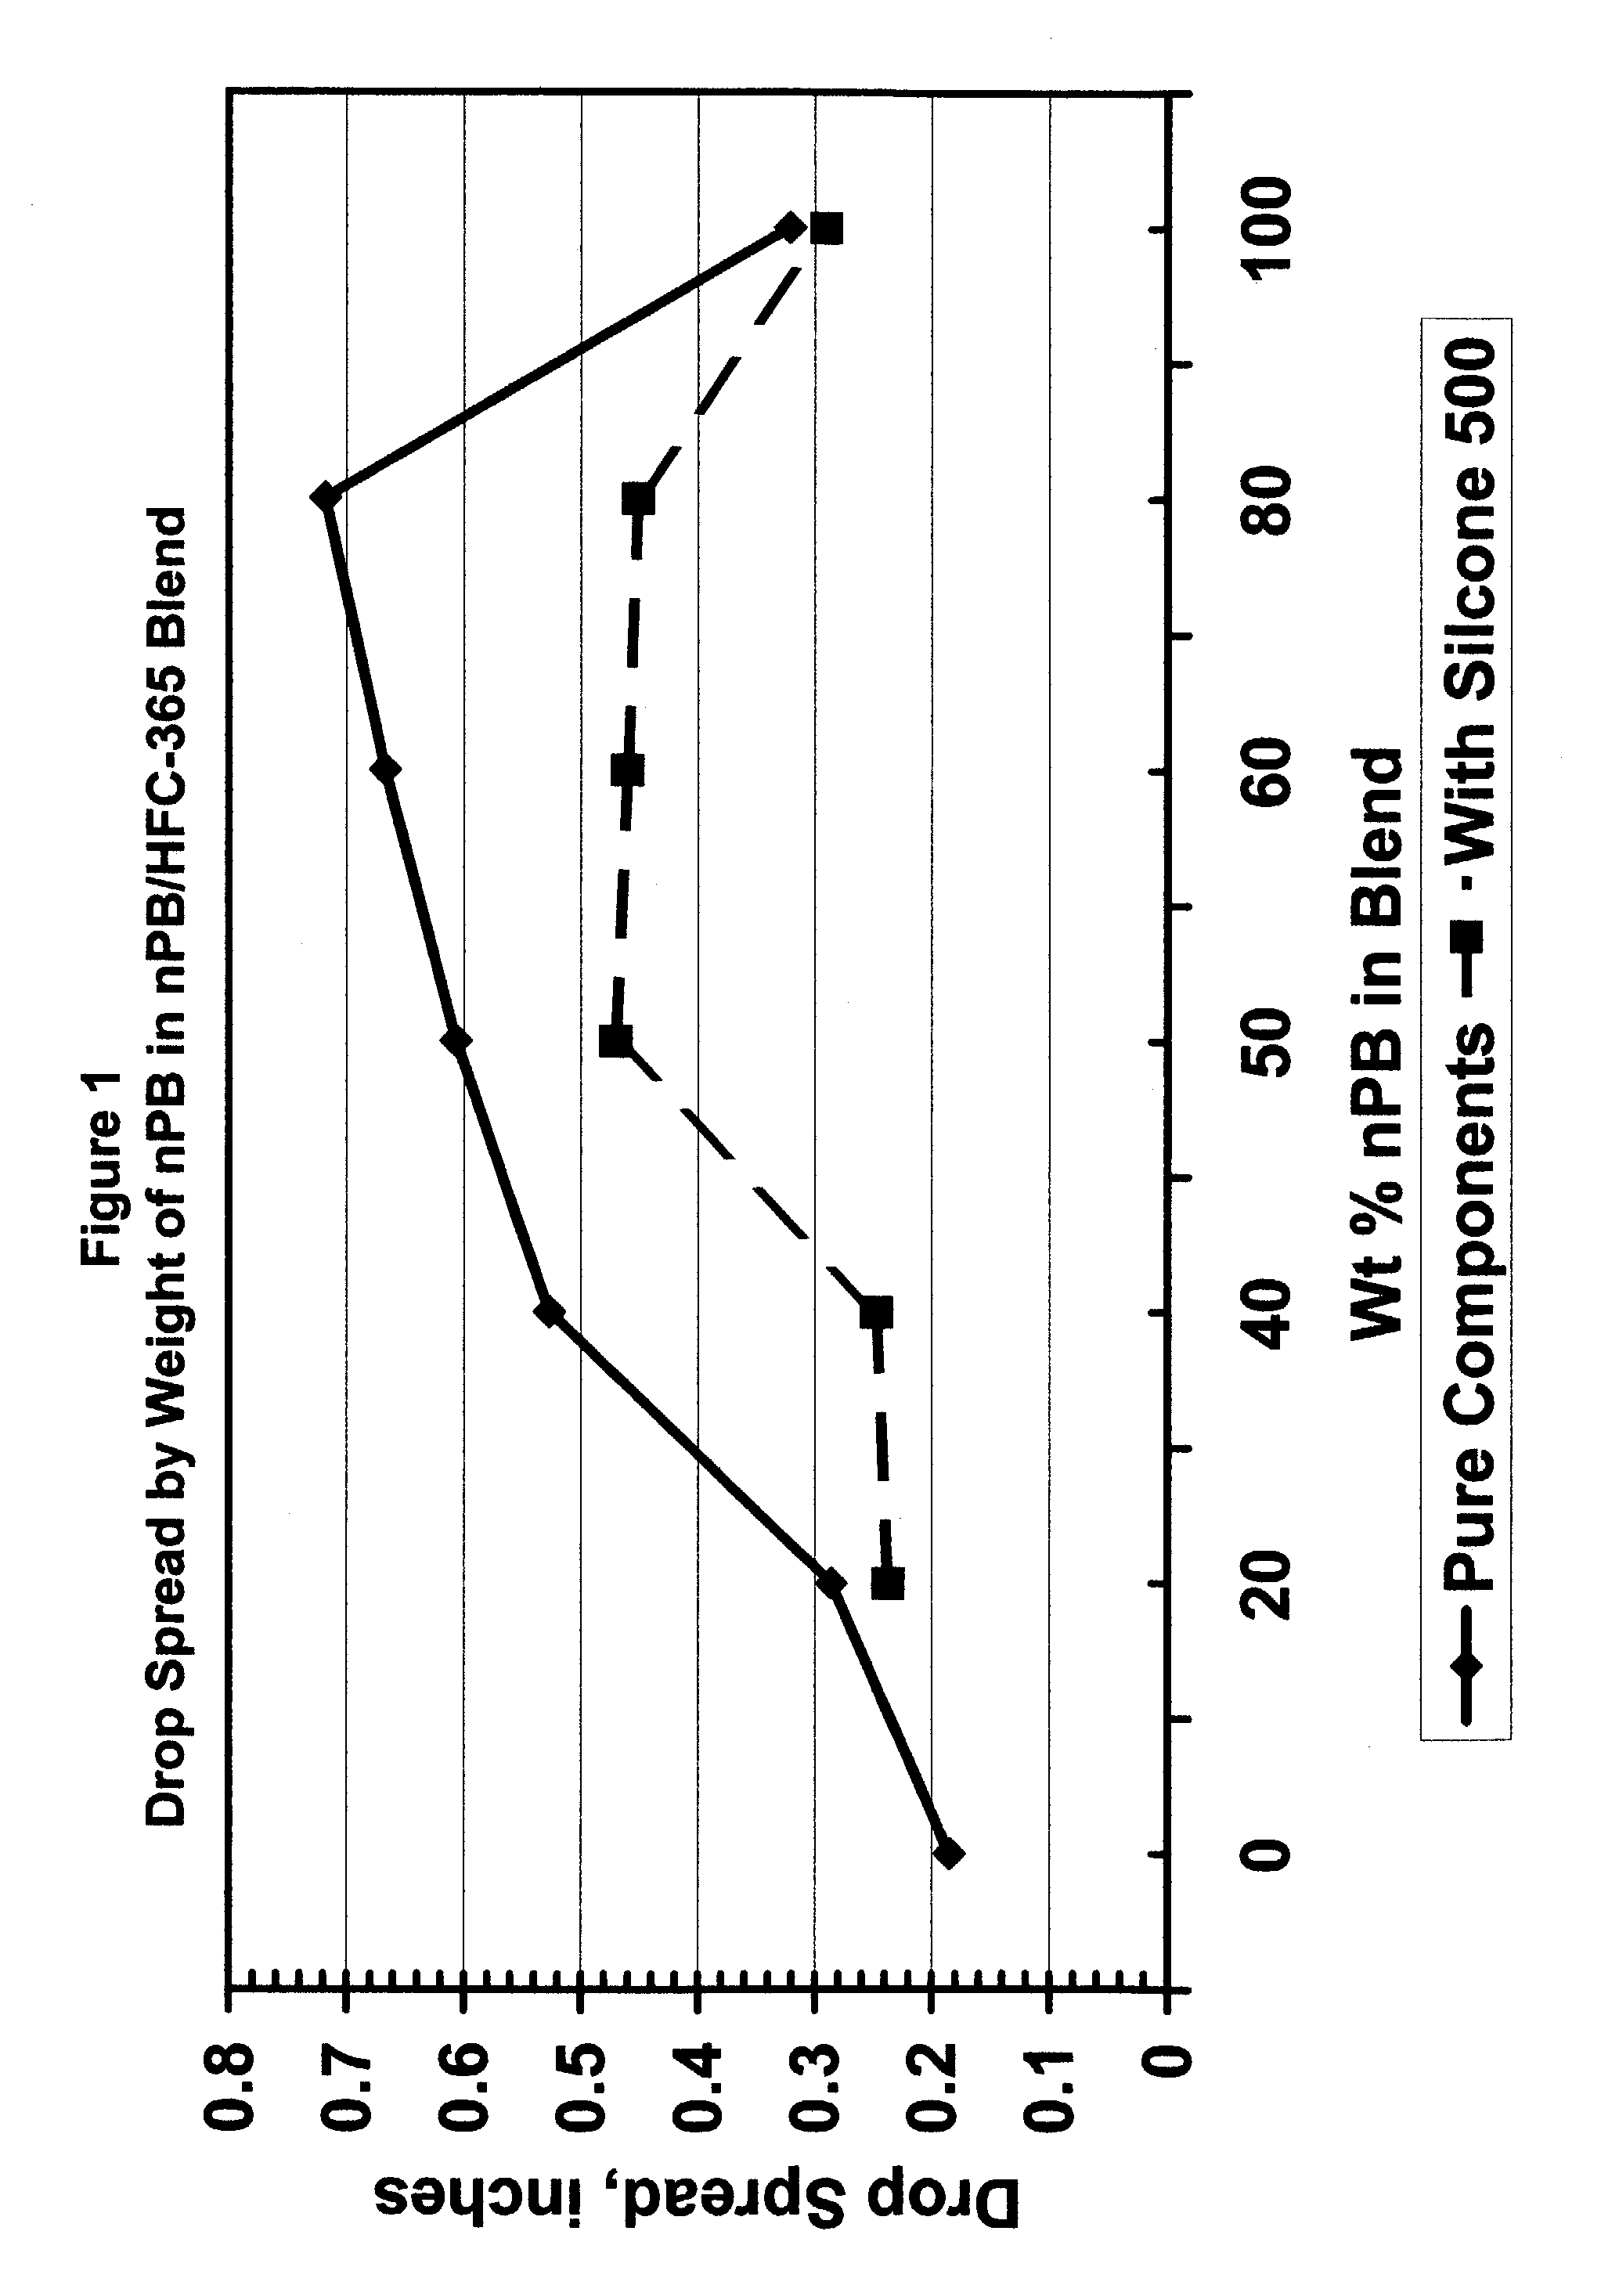 Compositions comprised of normal propyl bromide and 1,1,1,3,3-pentafluorobutane and uses thereof